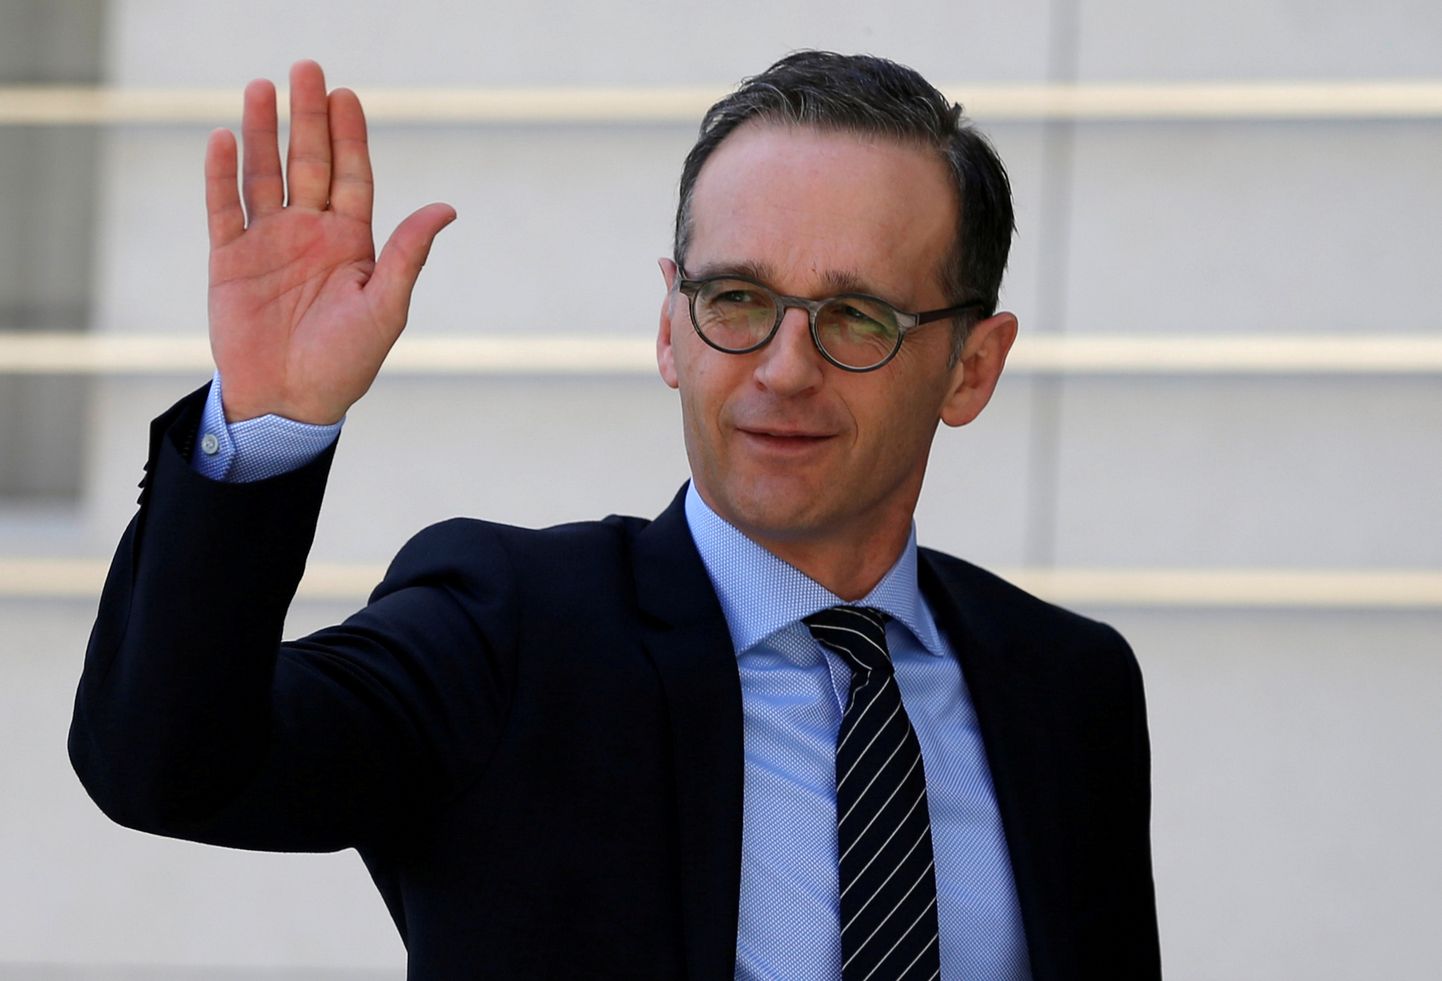 FILE PHOTO: German Foreign Minister Heiko Maas waves upon his arrival to meet with Palestinian President Mahmoud Abbas meets in Ramallah, in the occupied West Bank March 26, 2018. REUTERS/Mohamad Torokman/File Photo